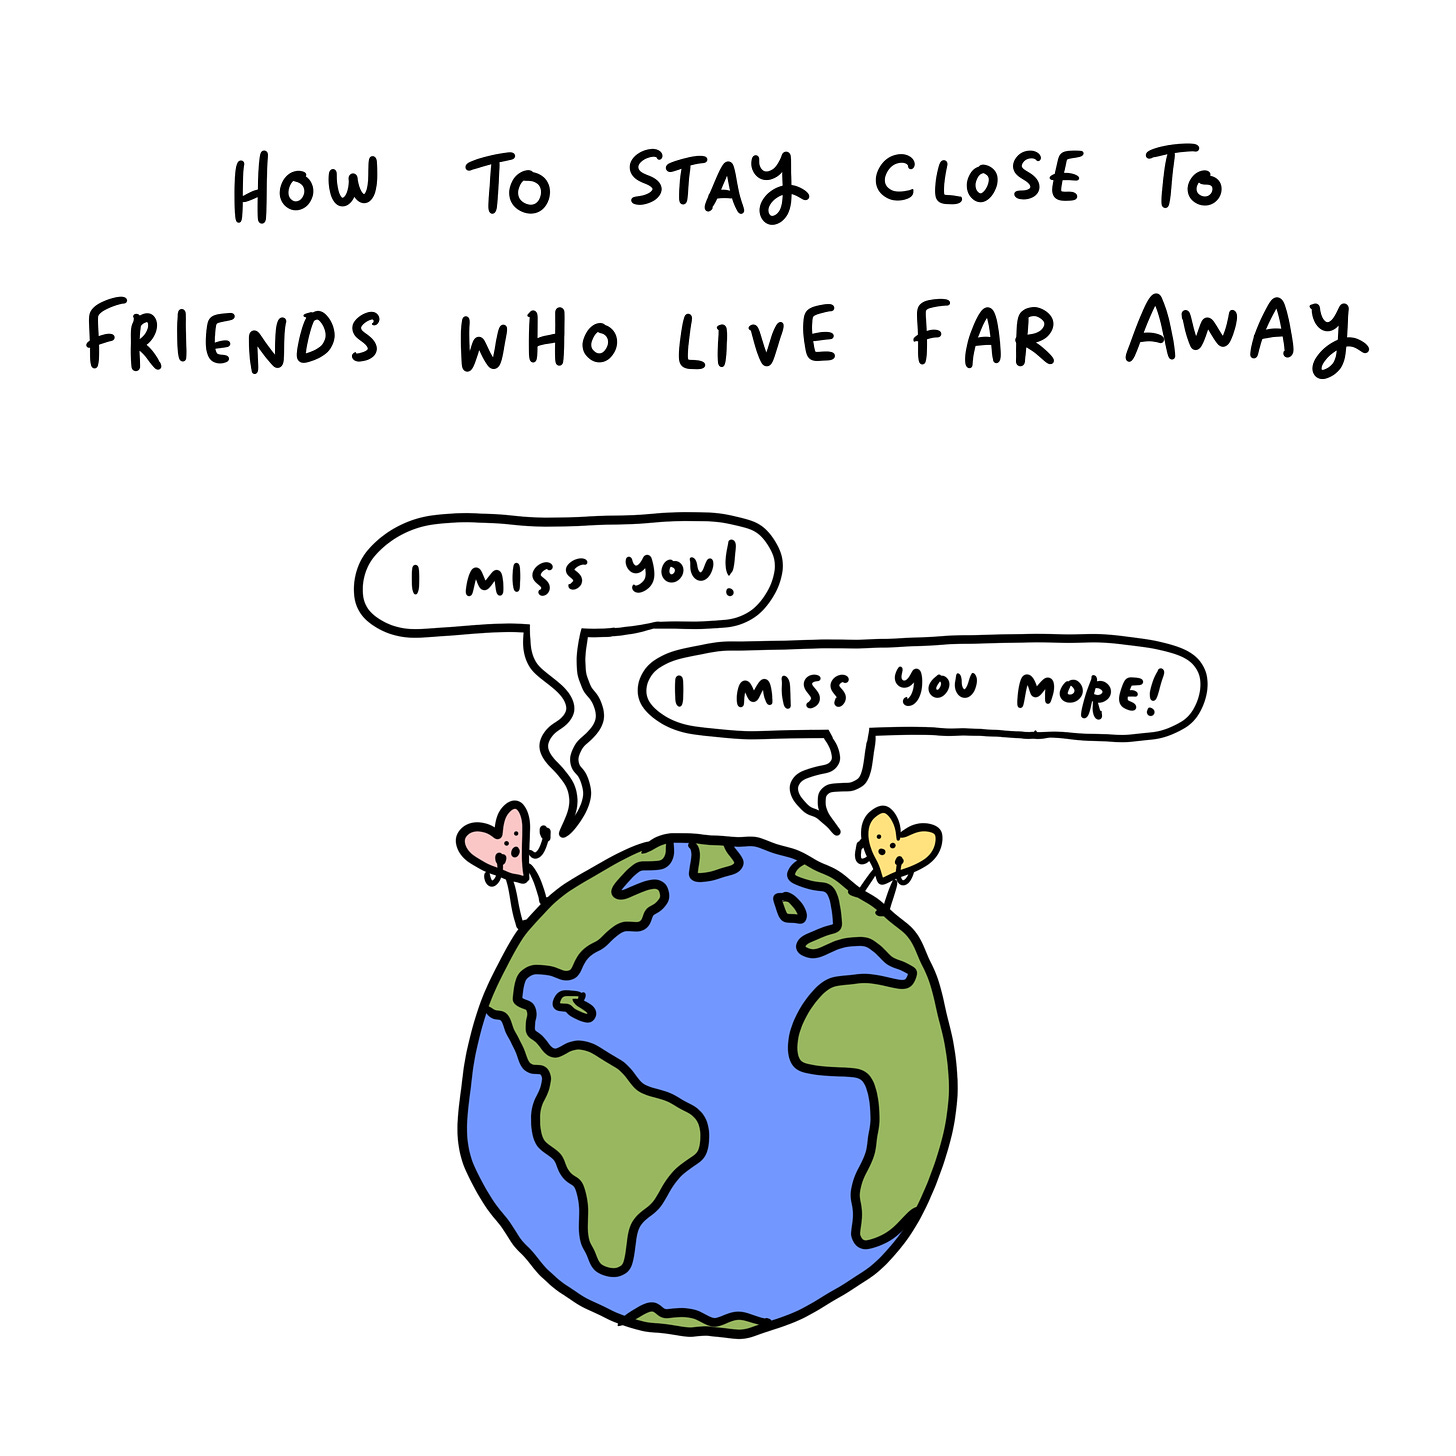 How to stay close to friends that live far away